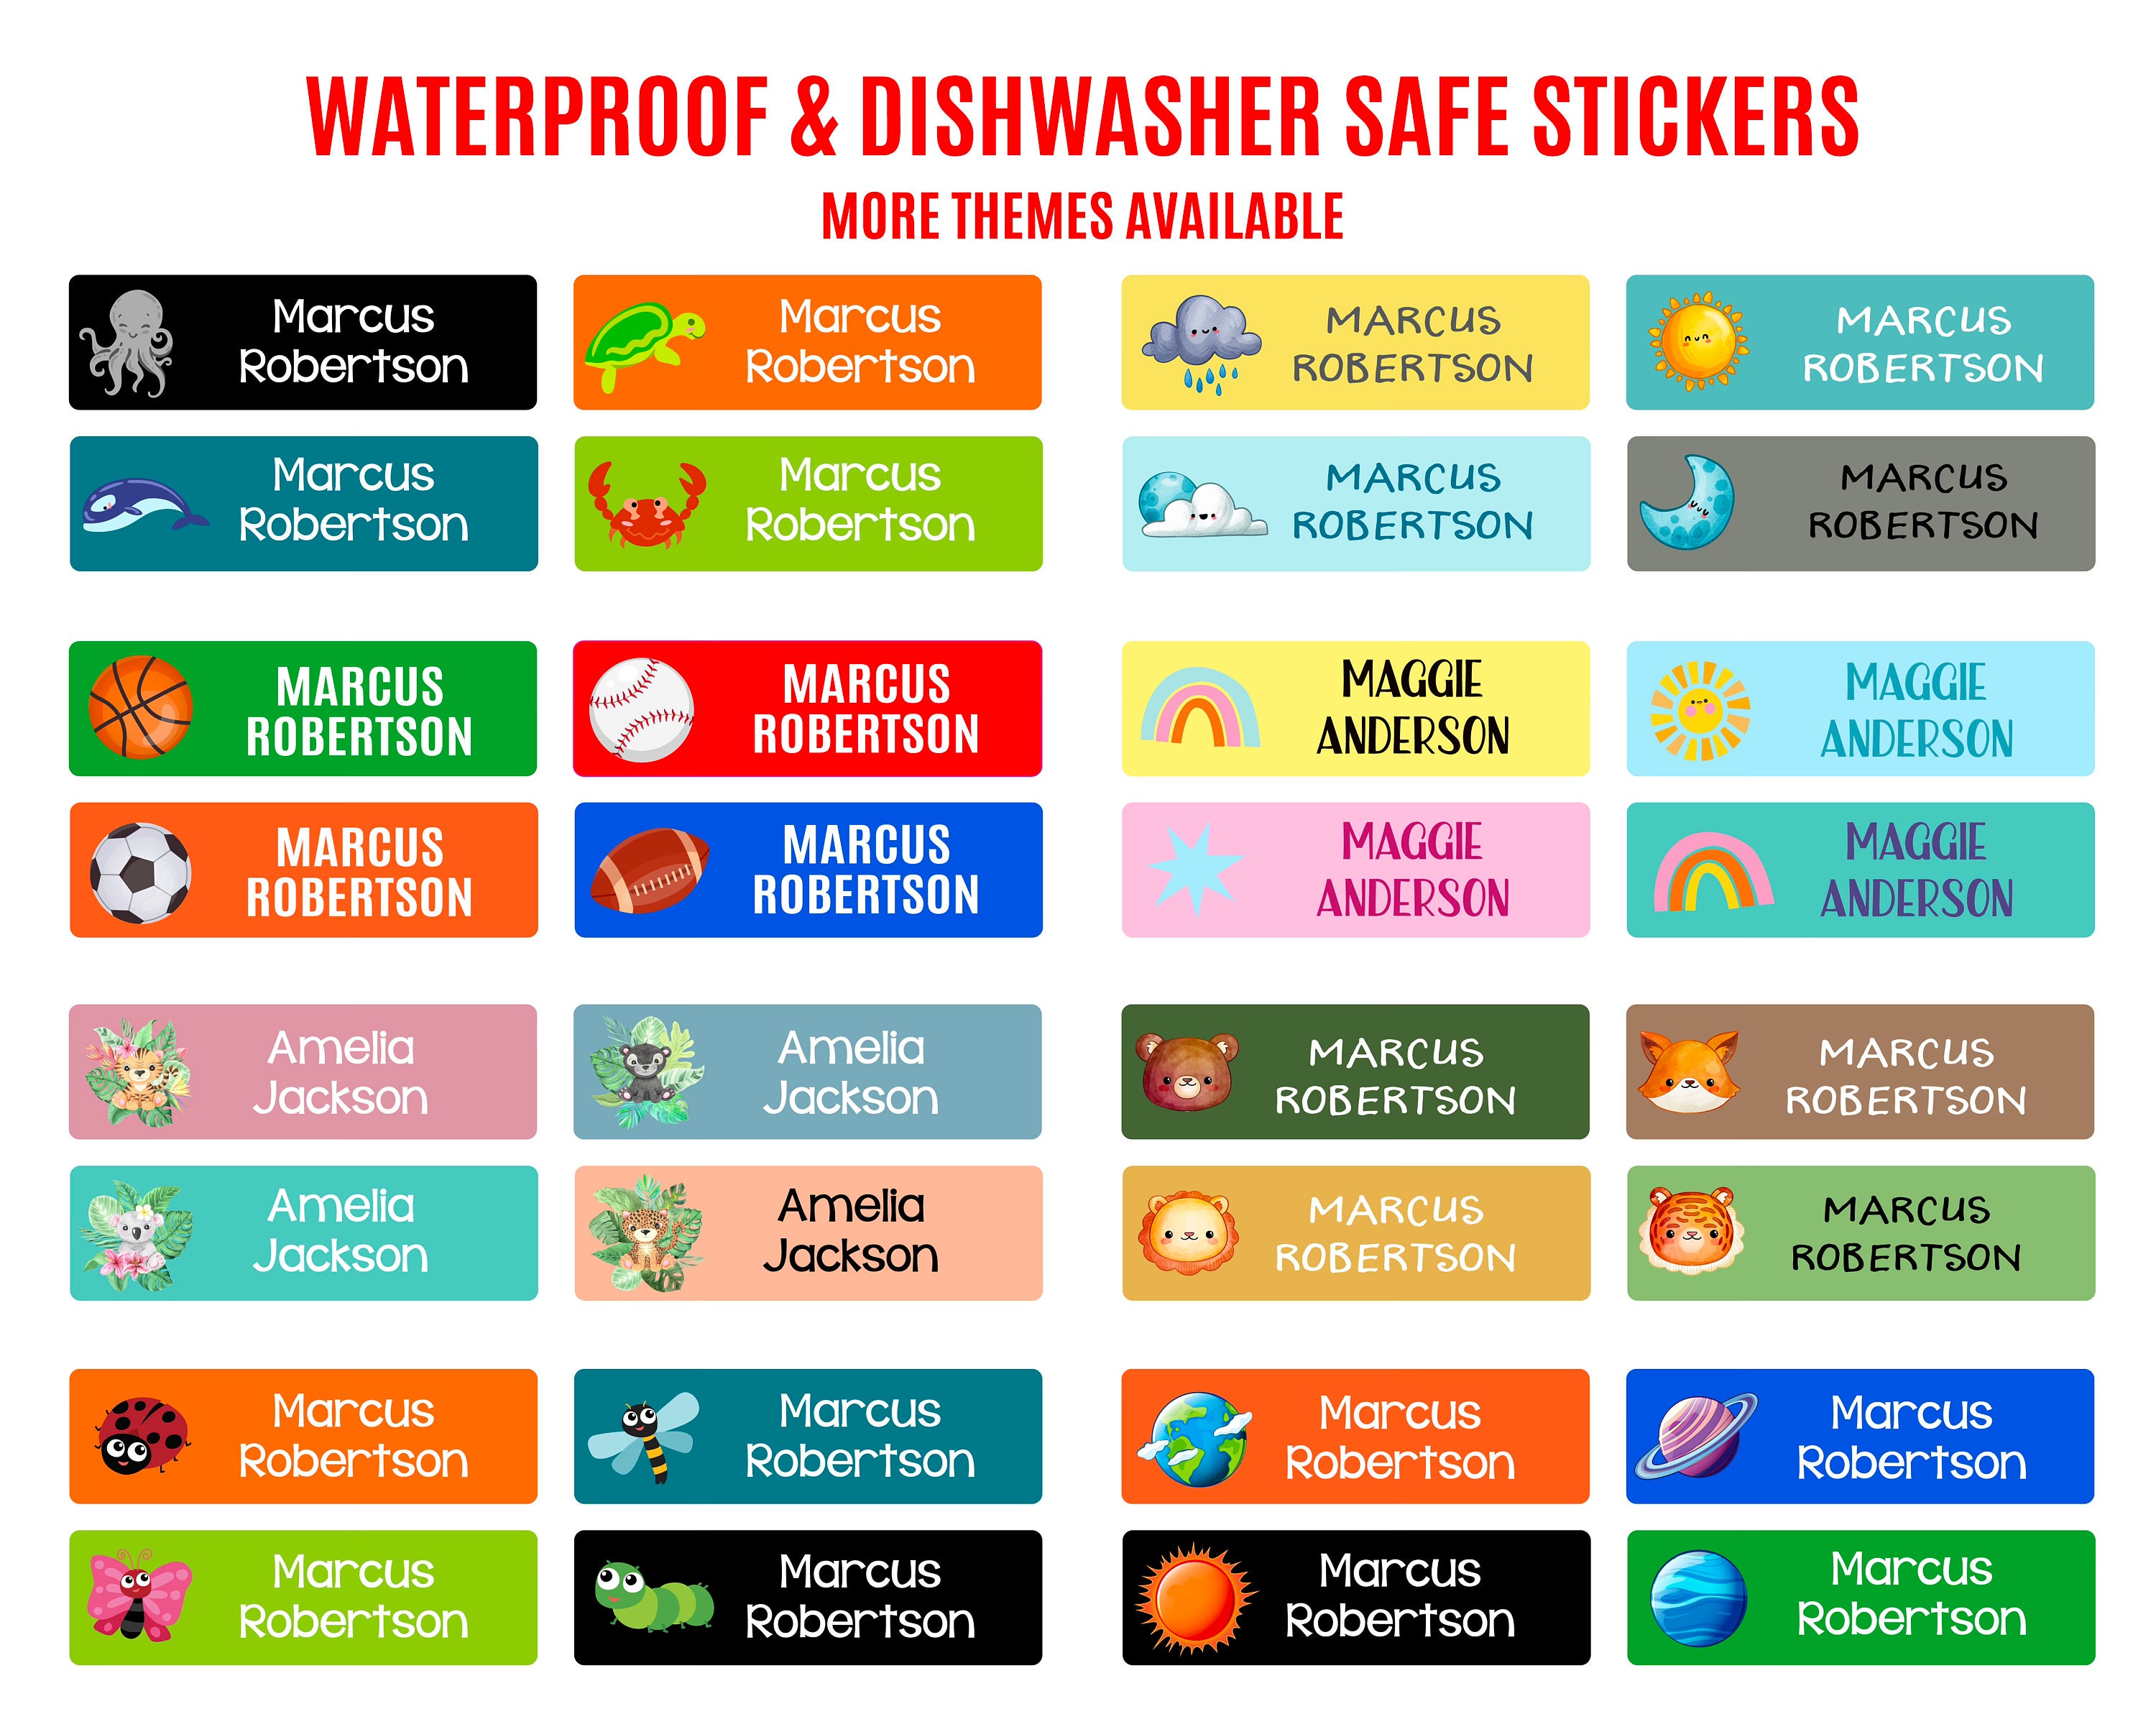 Motivational Words Stickers for Kids and Children| 50 Pcs Inspirational Words Waterproof Vinyl Stickers for Kindergarten Students and Pupils